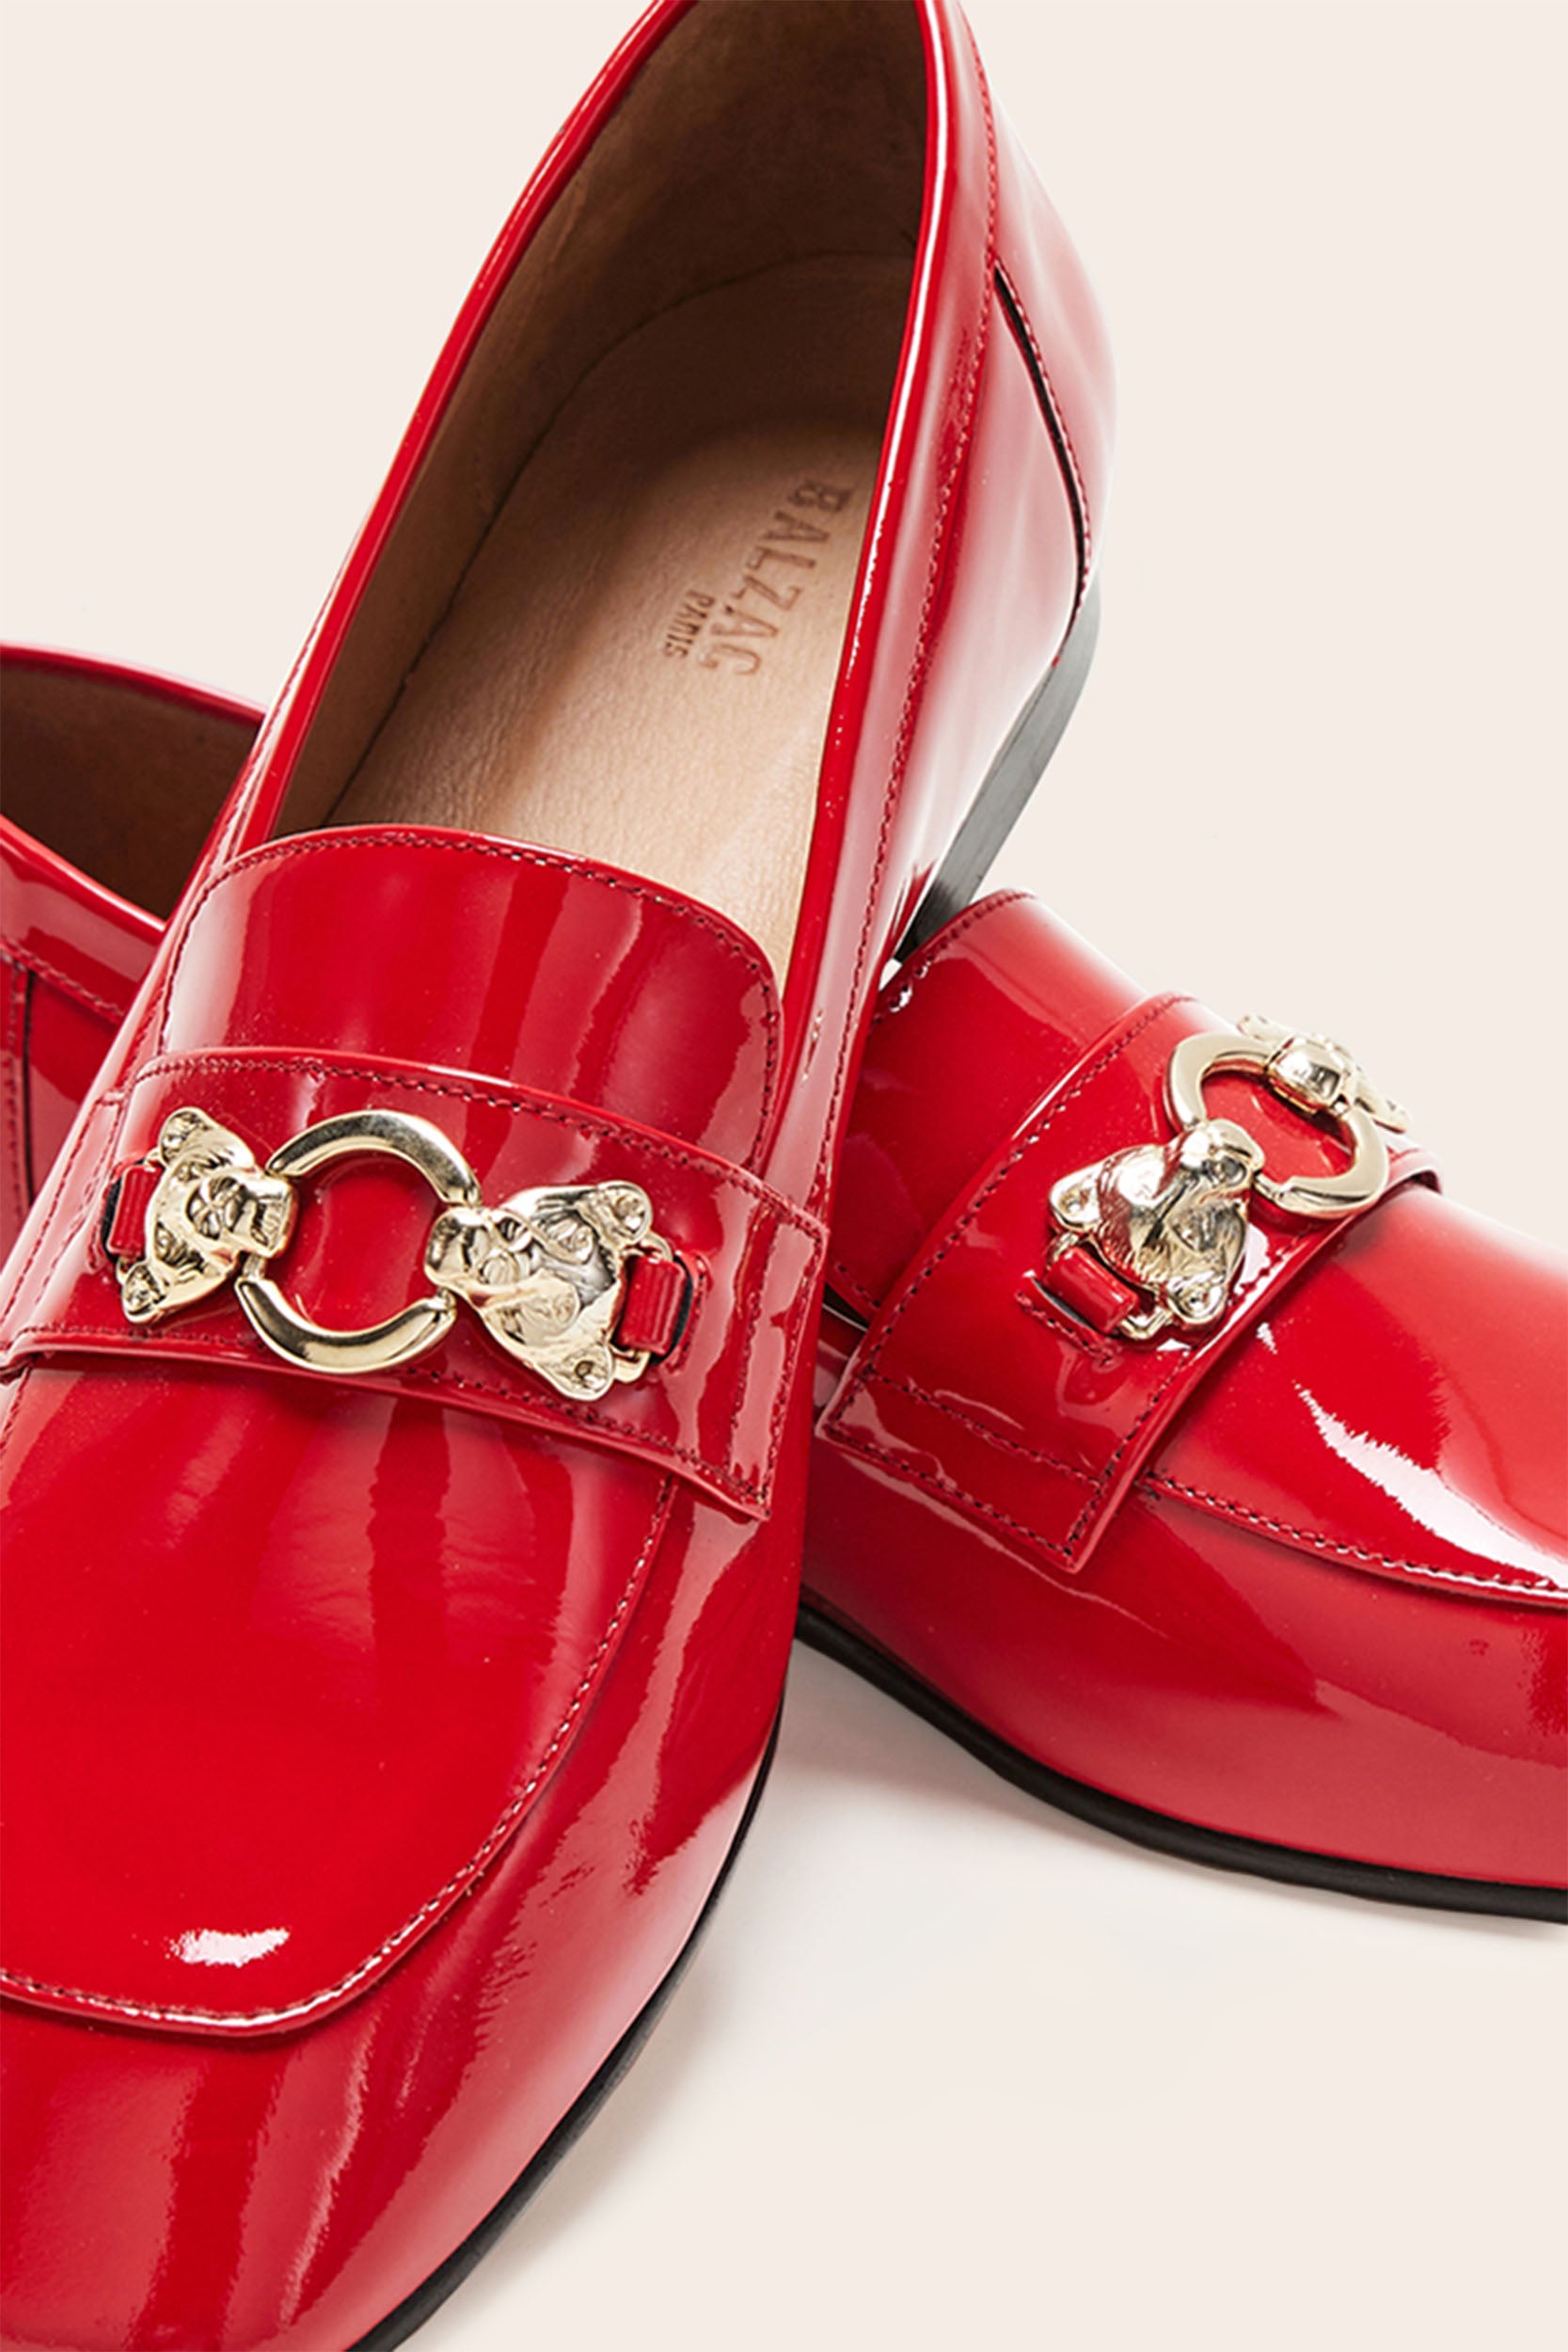 Flavie red patent moccasins